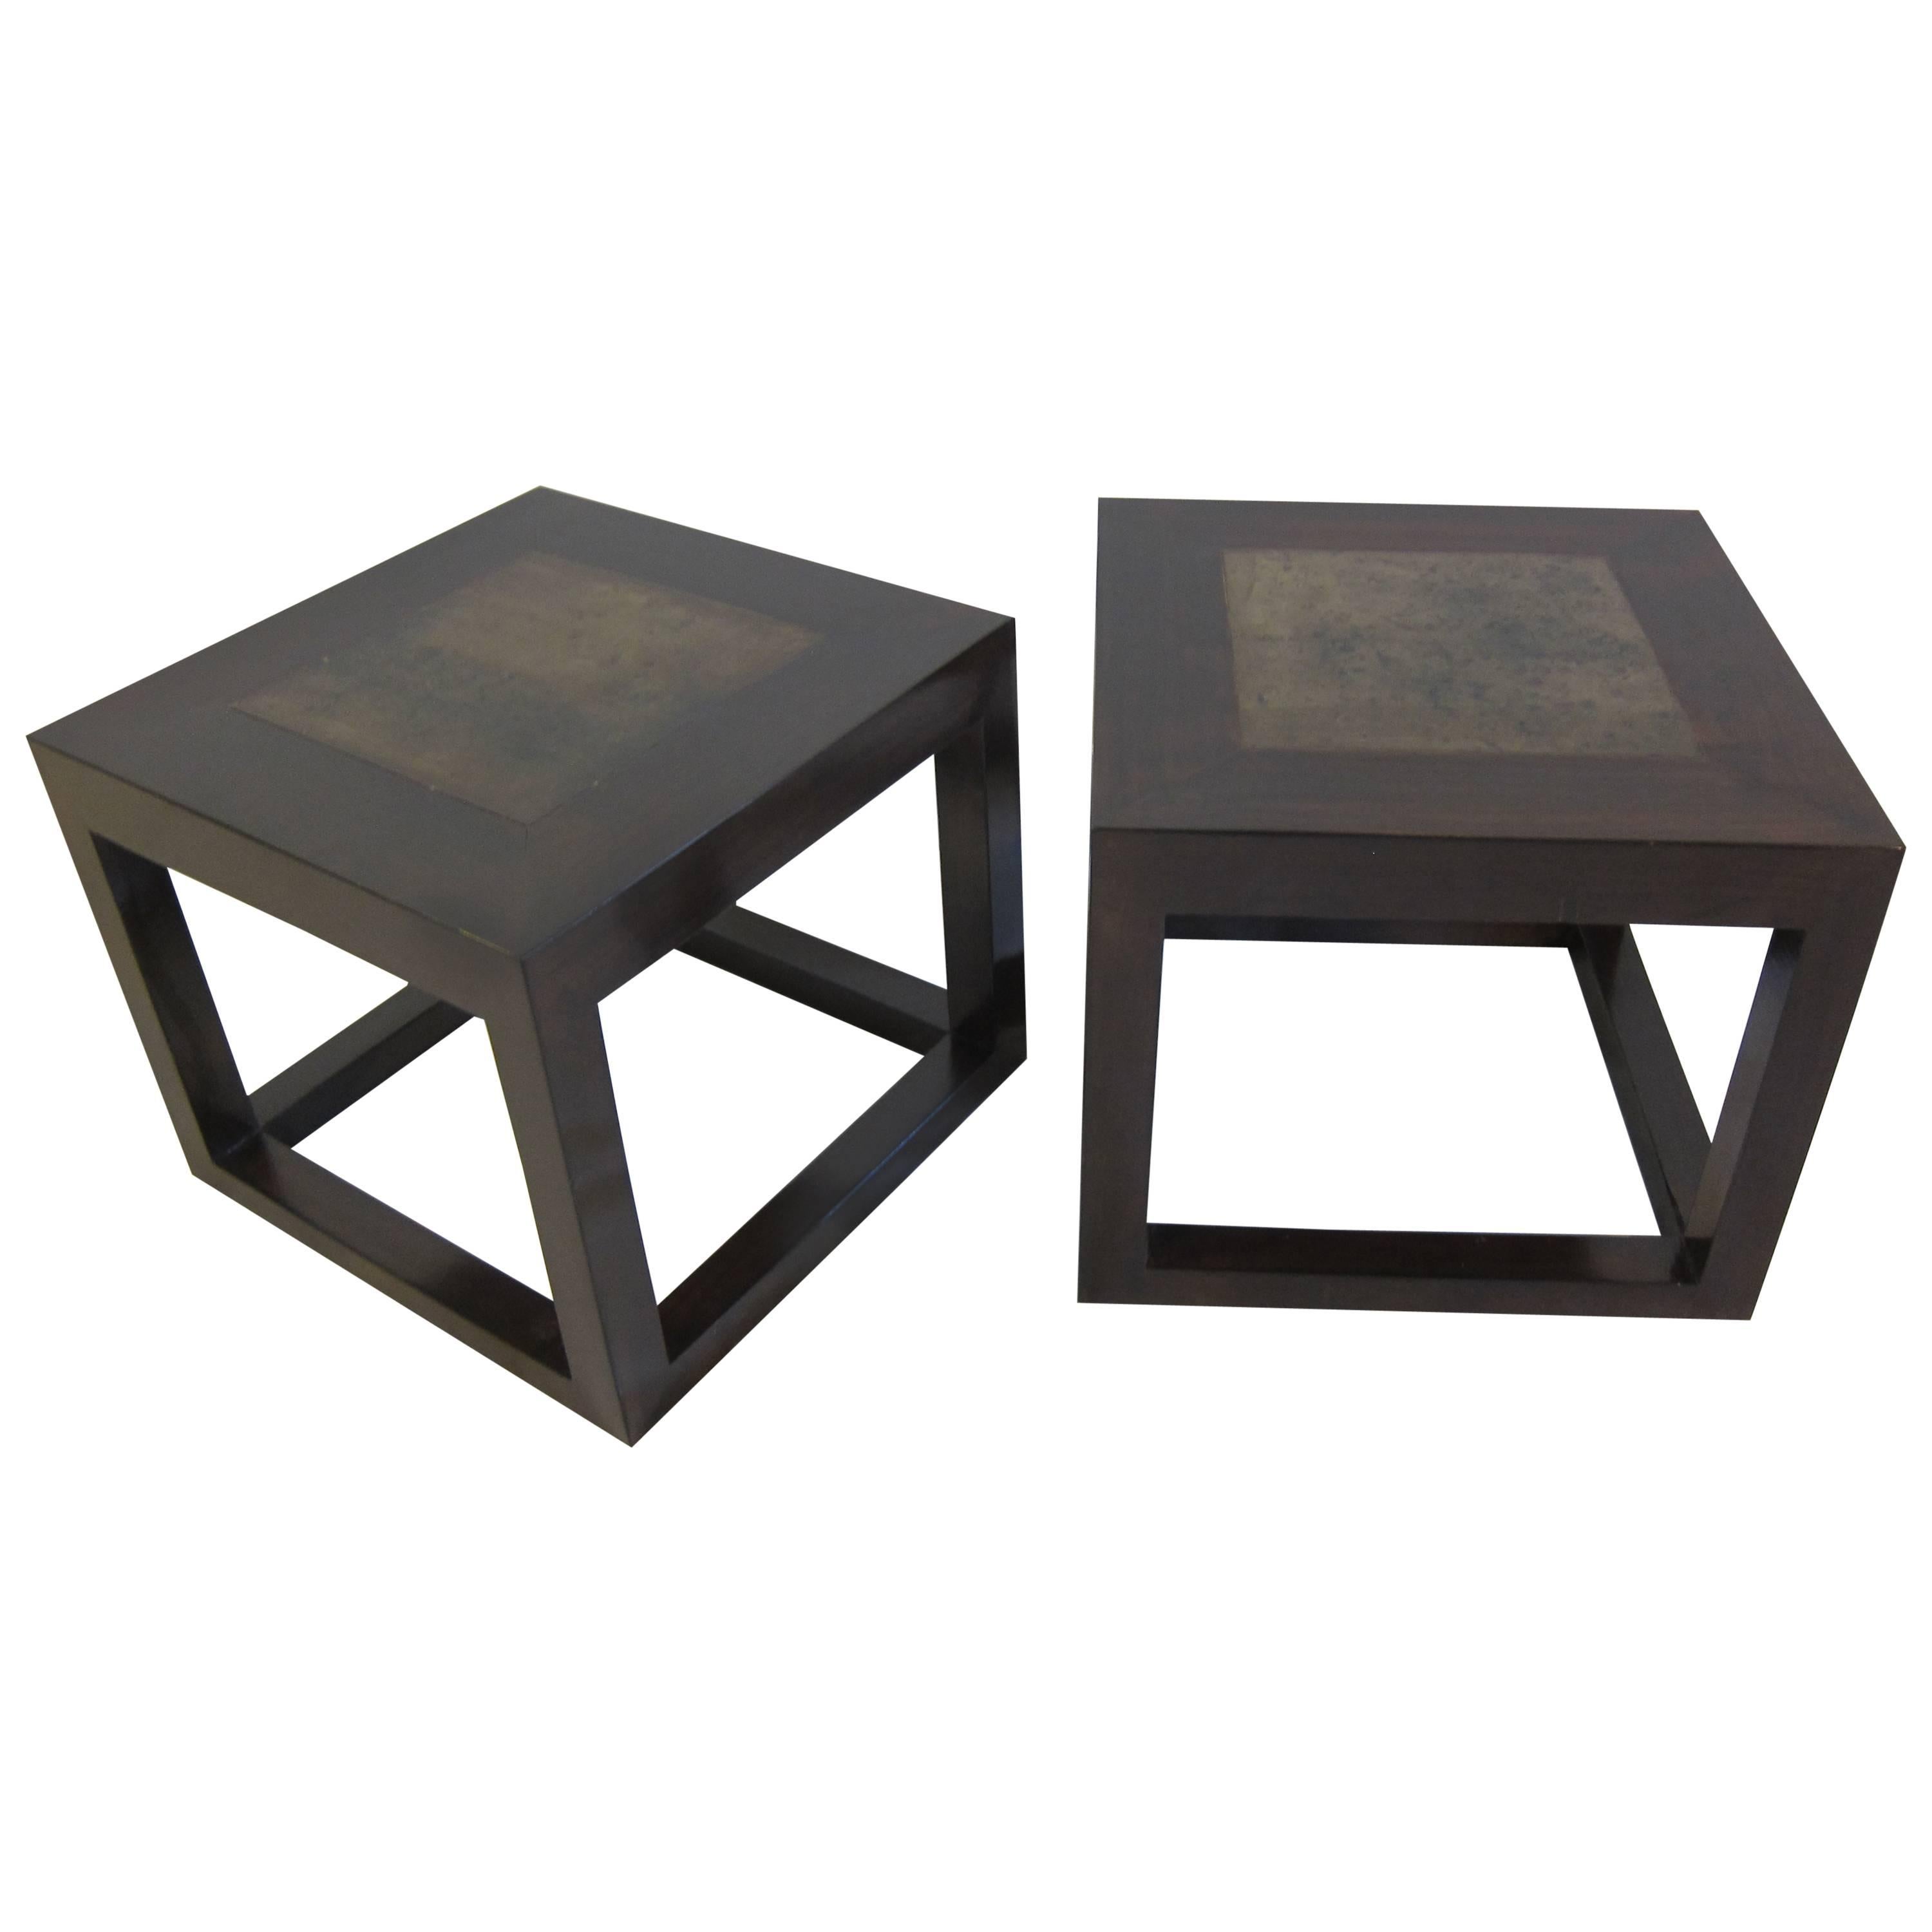 Cube Stone Top Tables